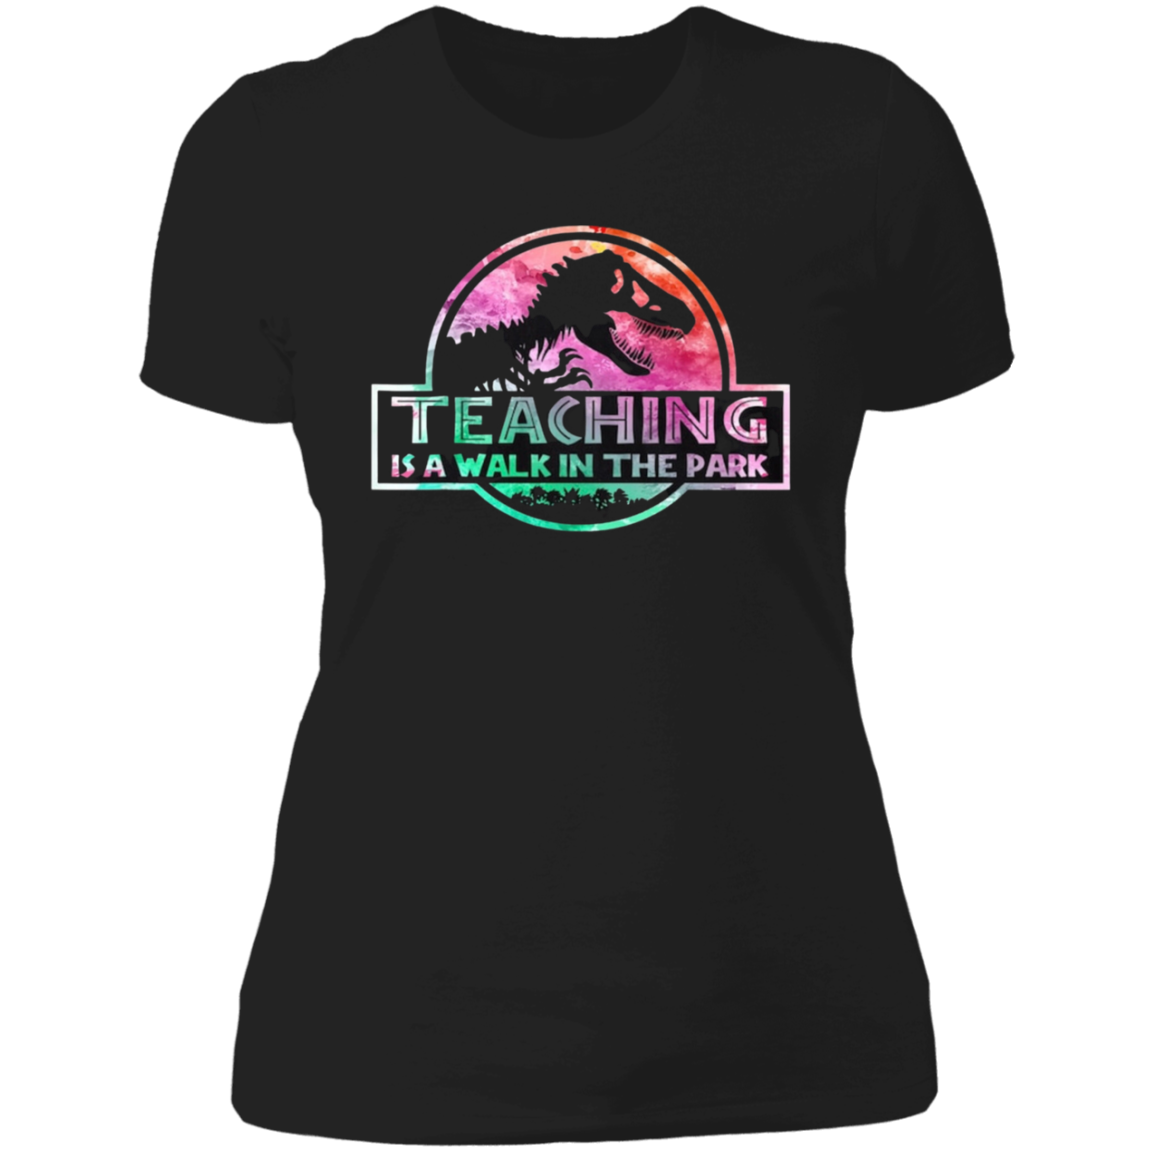 Teaching is a walk in the park Tee